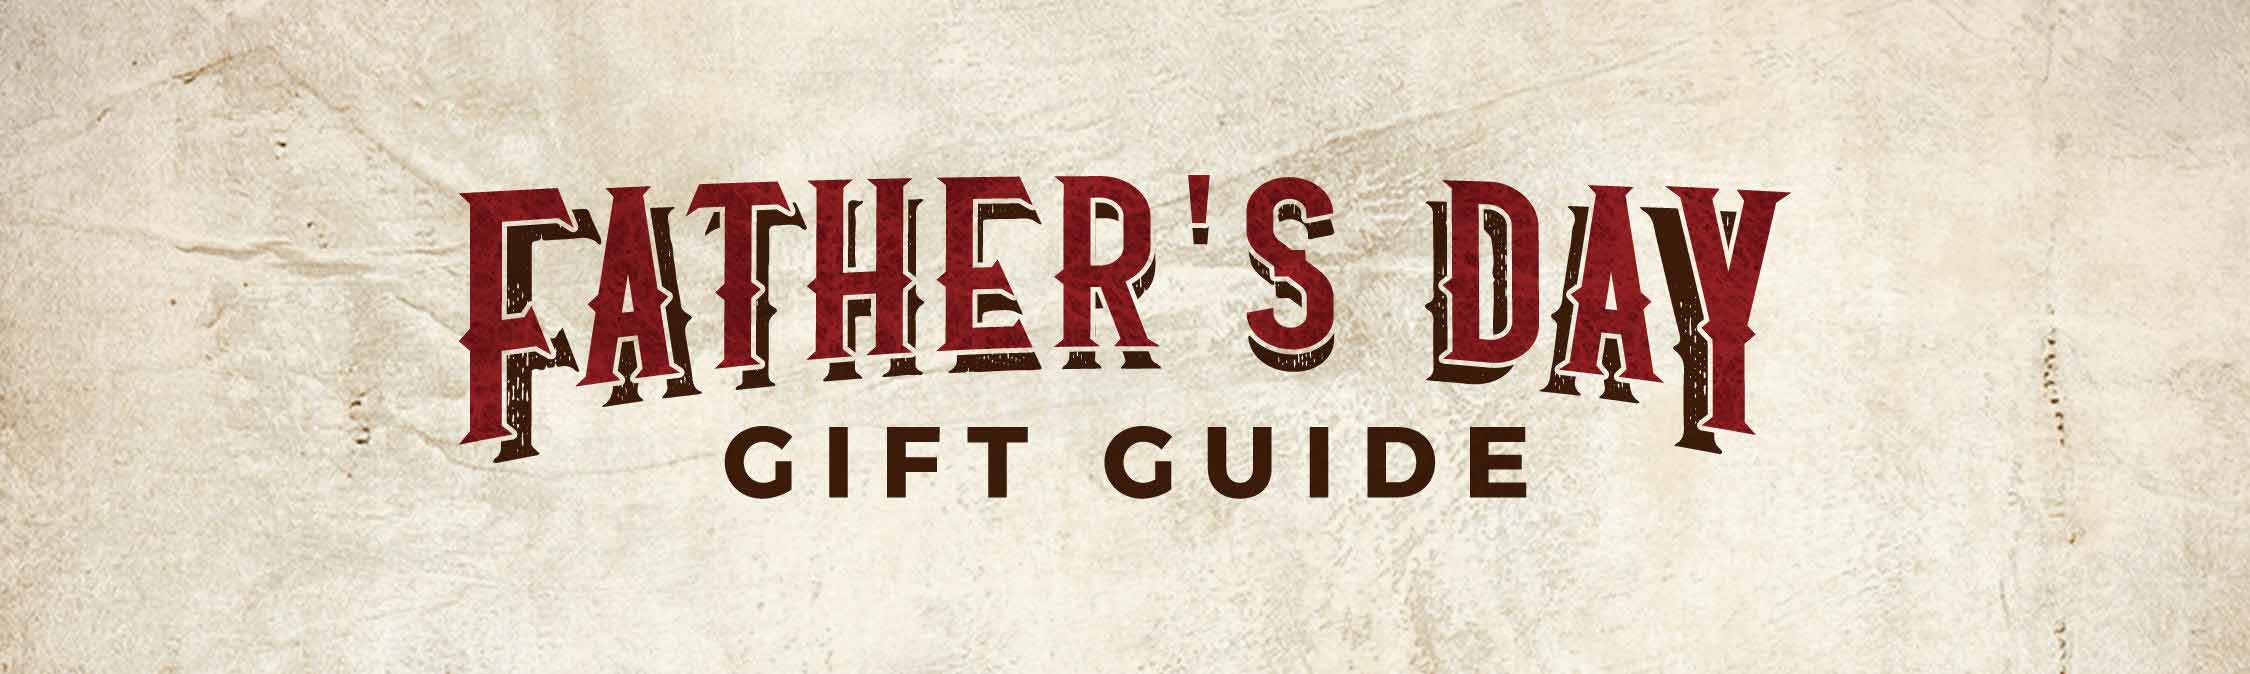 fathers day gift guide header